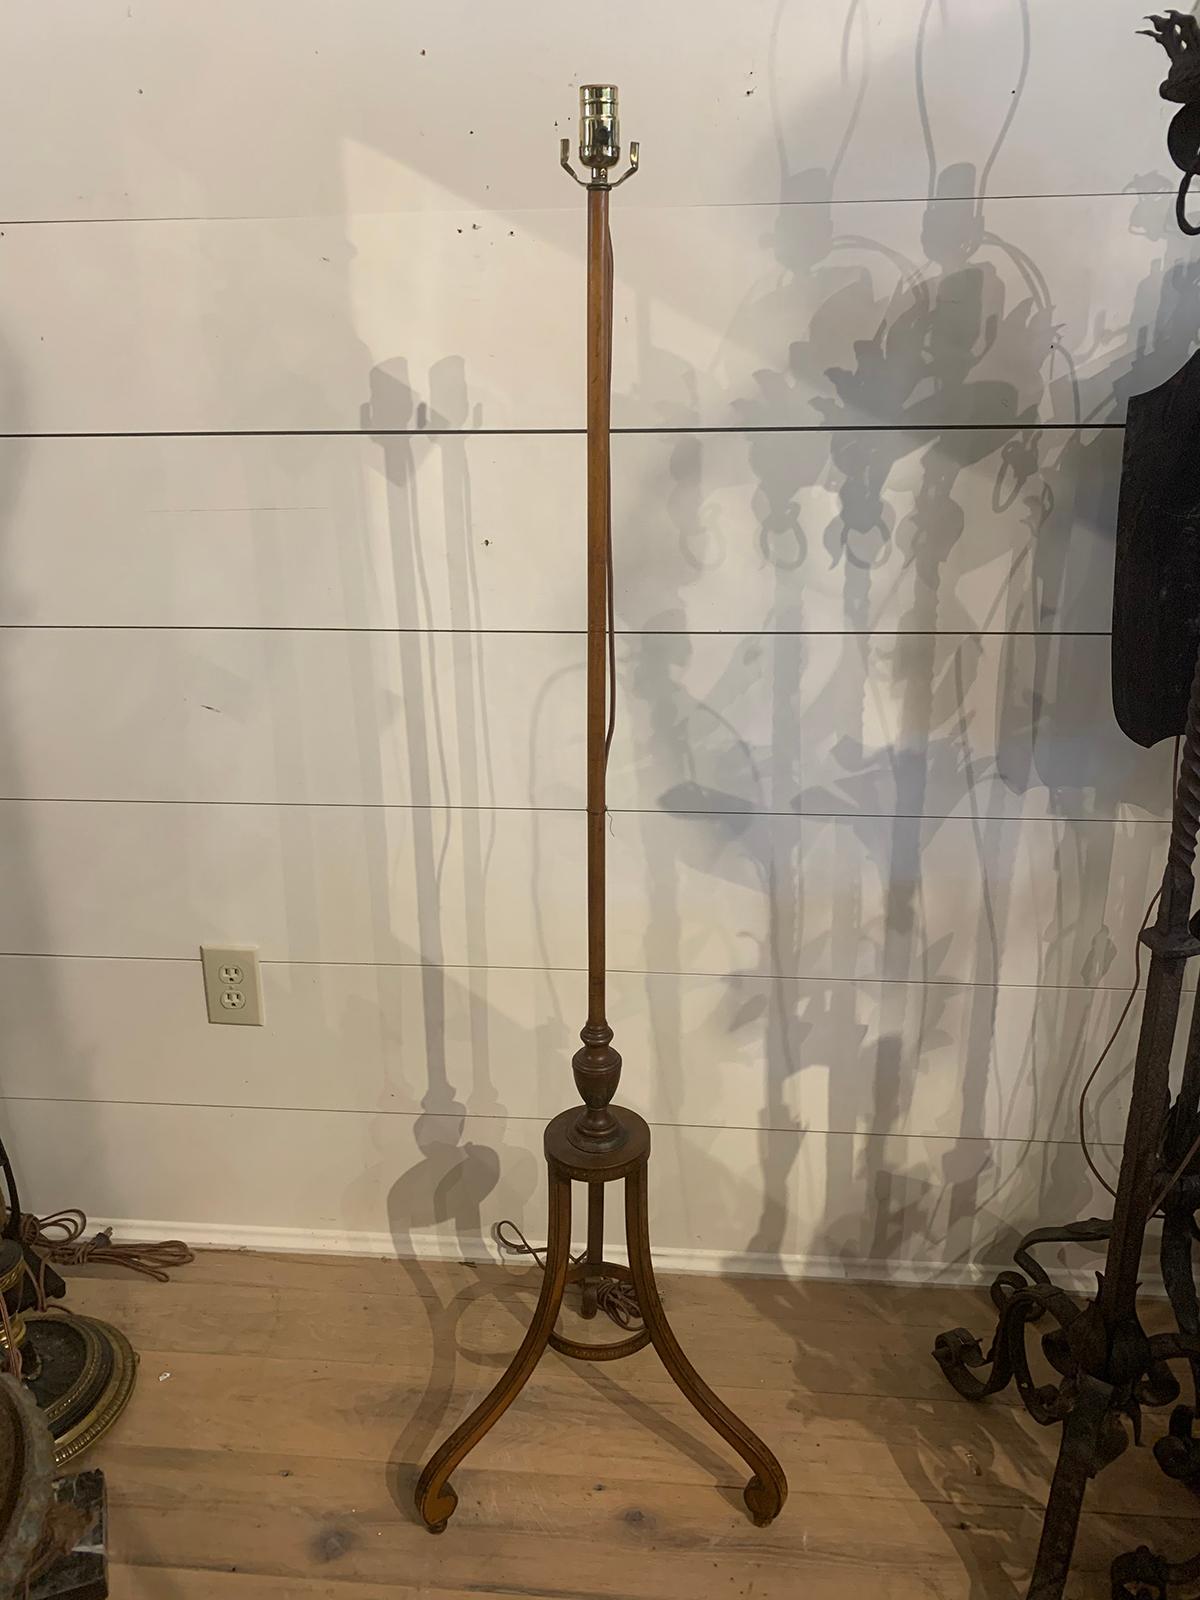 19th century English screen pole as floor lamp with painted detail
New wiring.